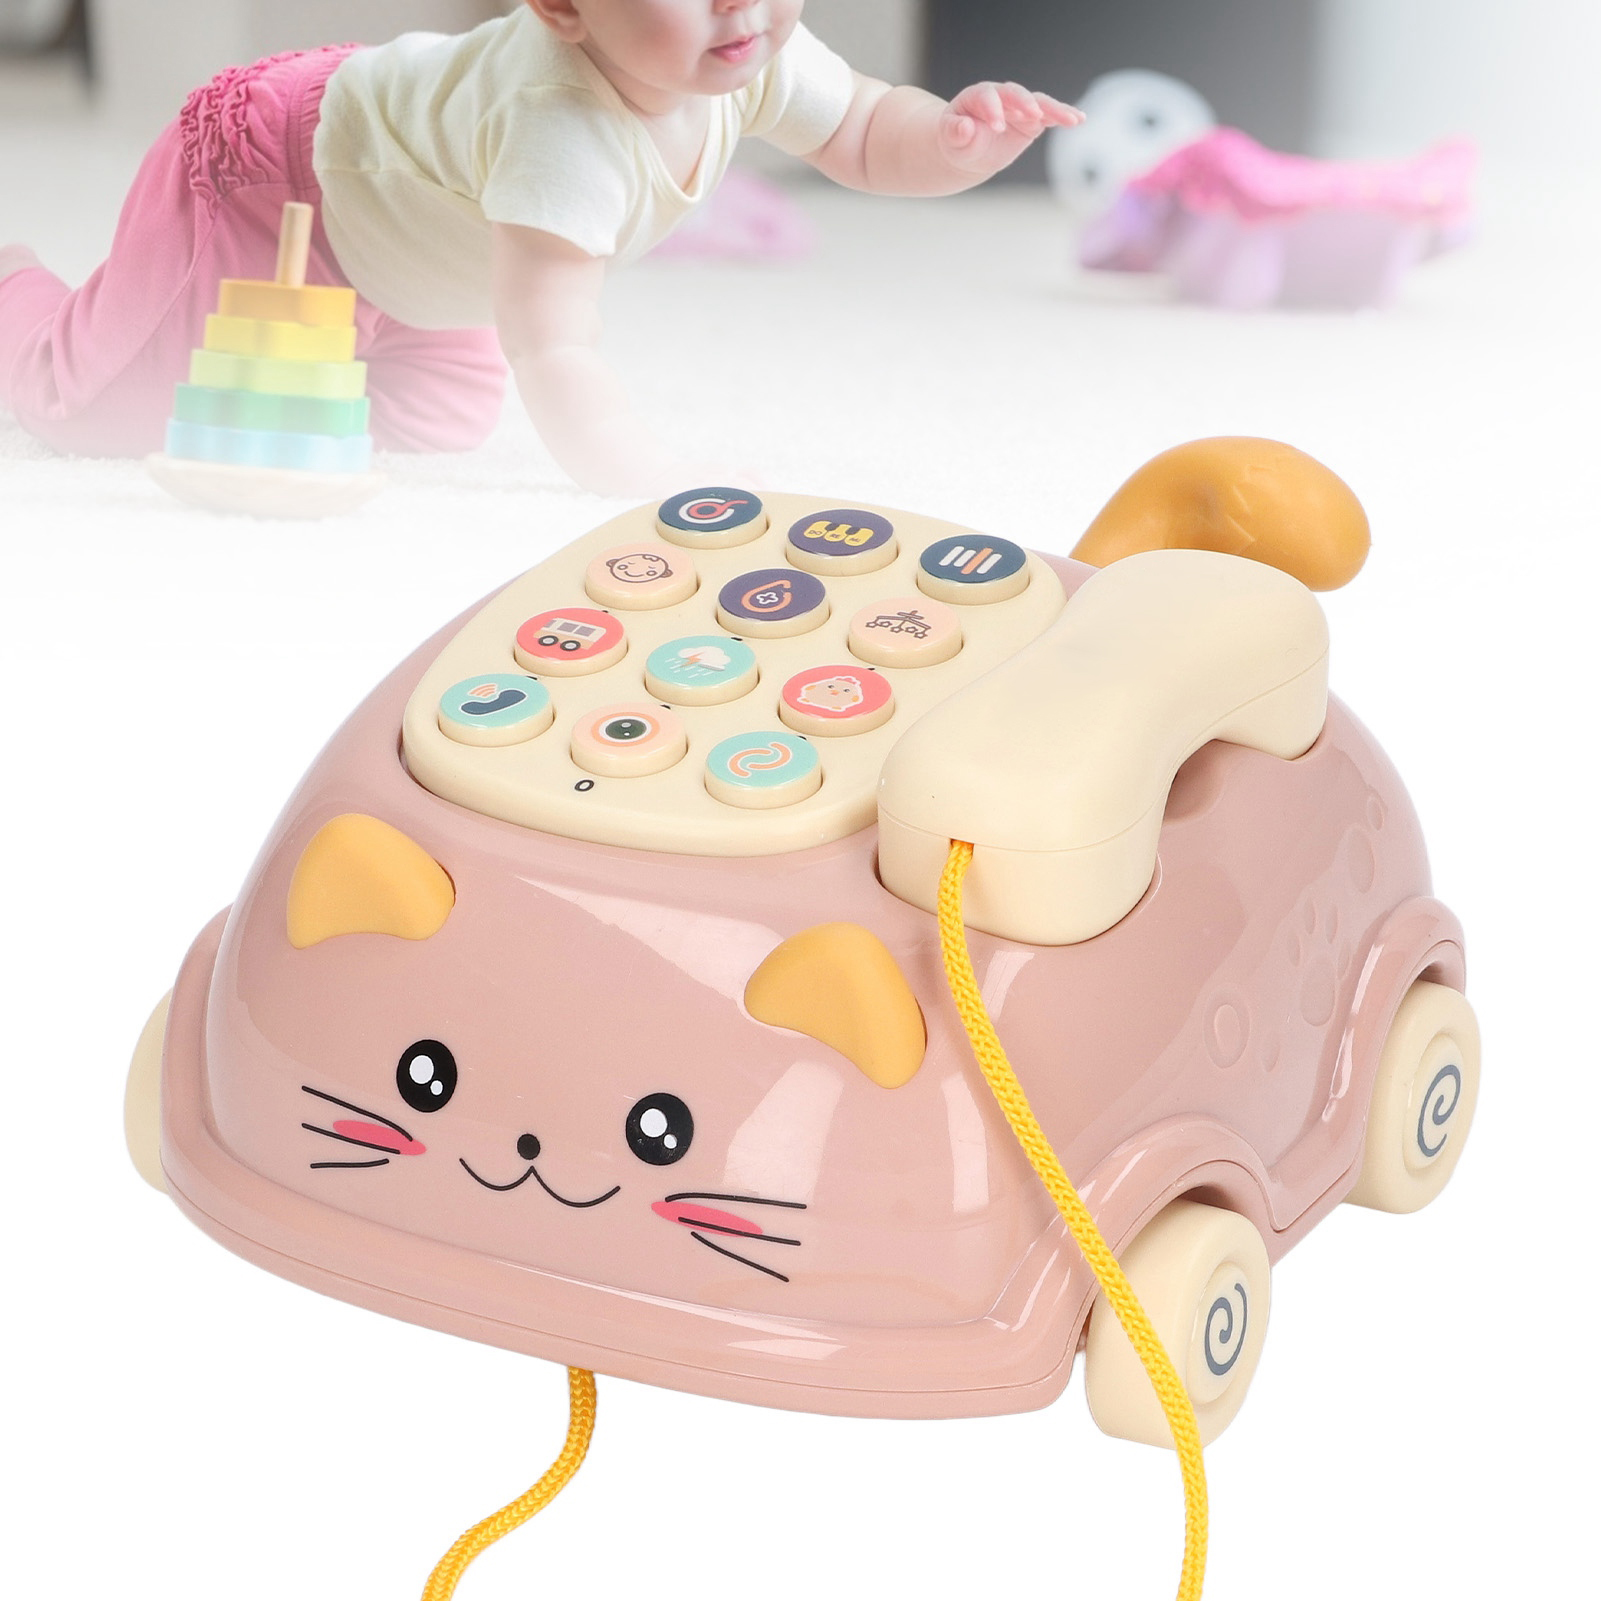 Baby Phone, Plastic Bilingual 12 Buttons Baby Musical Toy  For Enlightment Pink - image 5 of 8